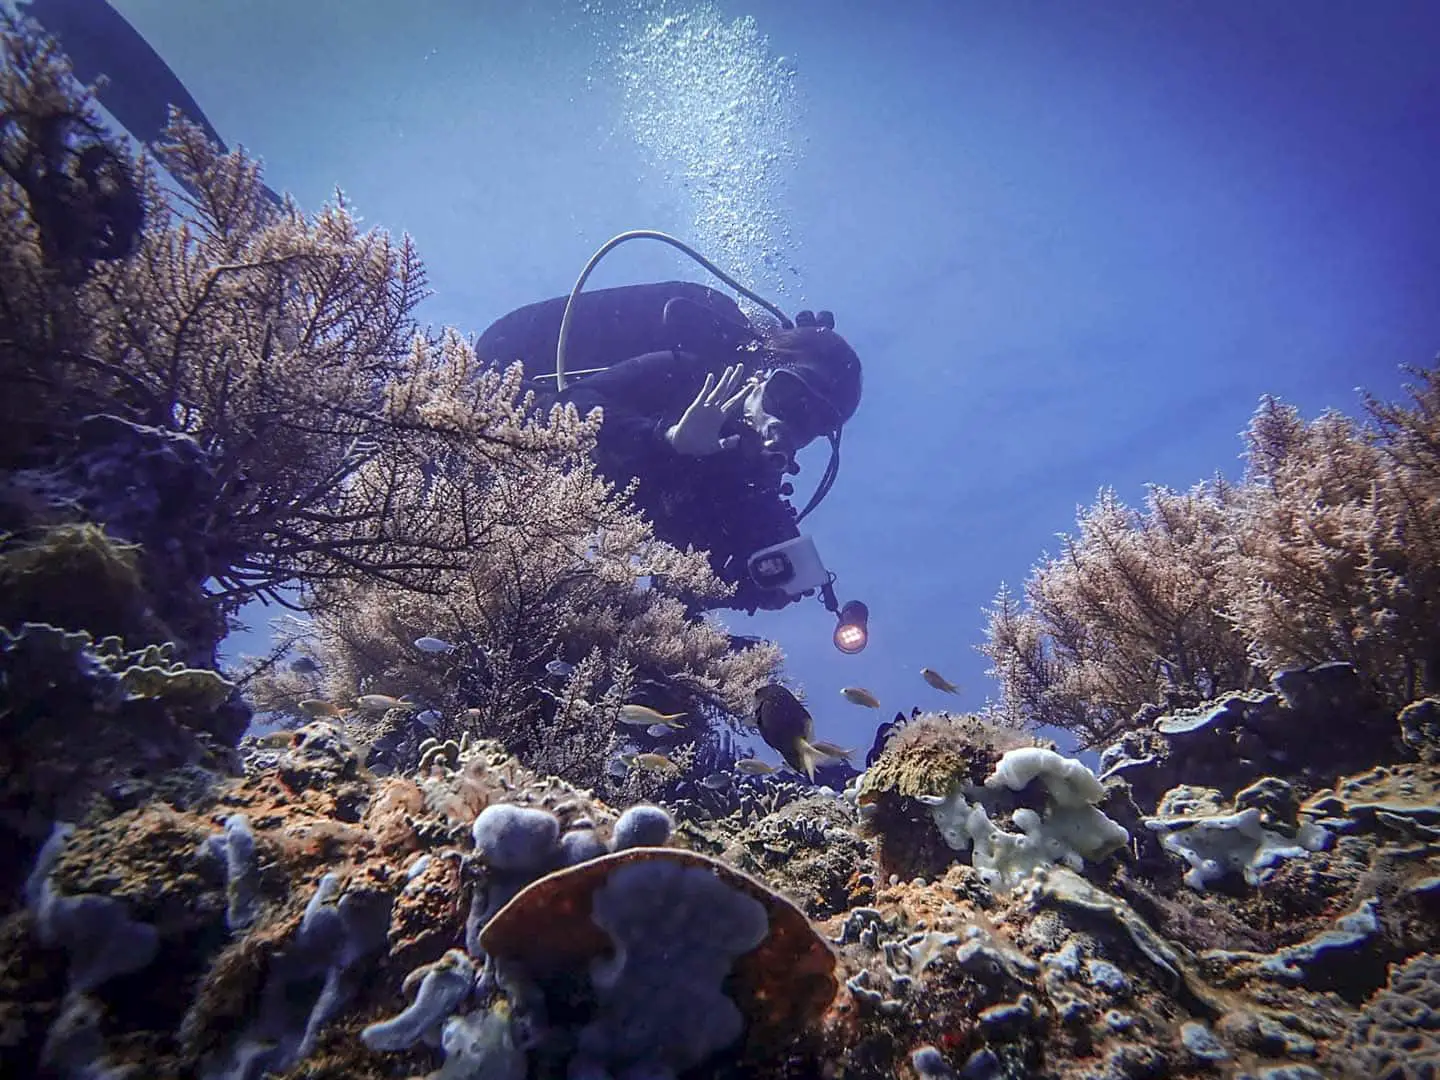 Philippines Scuba Diving Gear Packing List- Bring your underwater camera